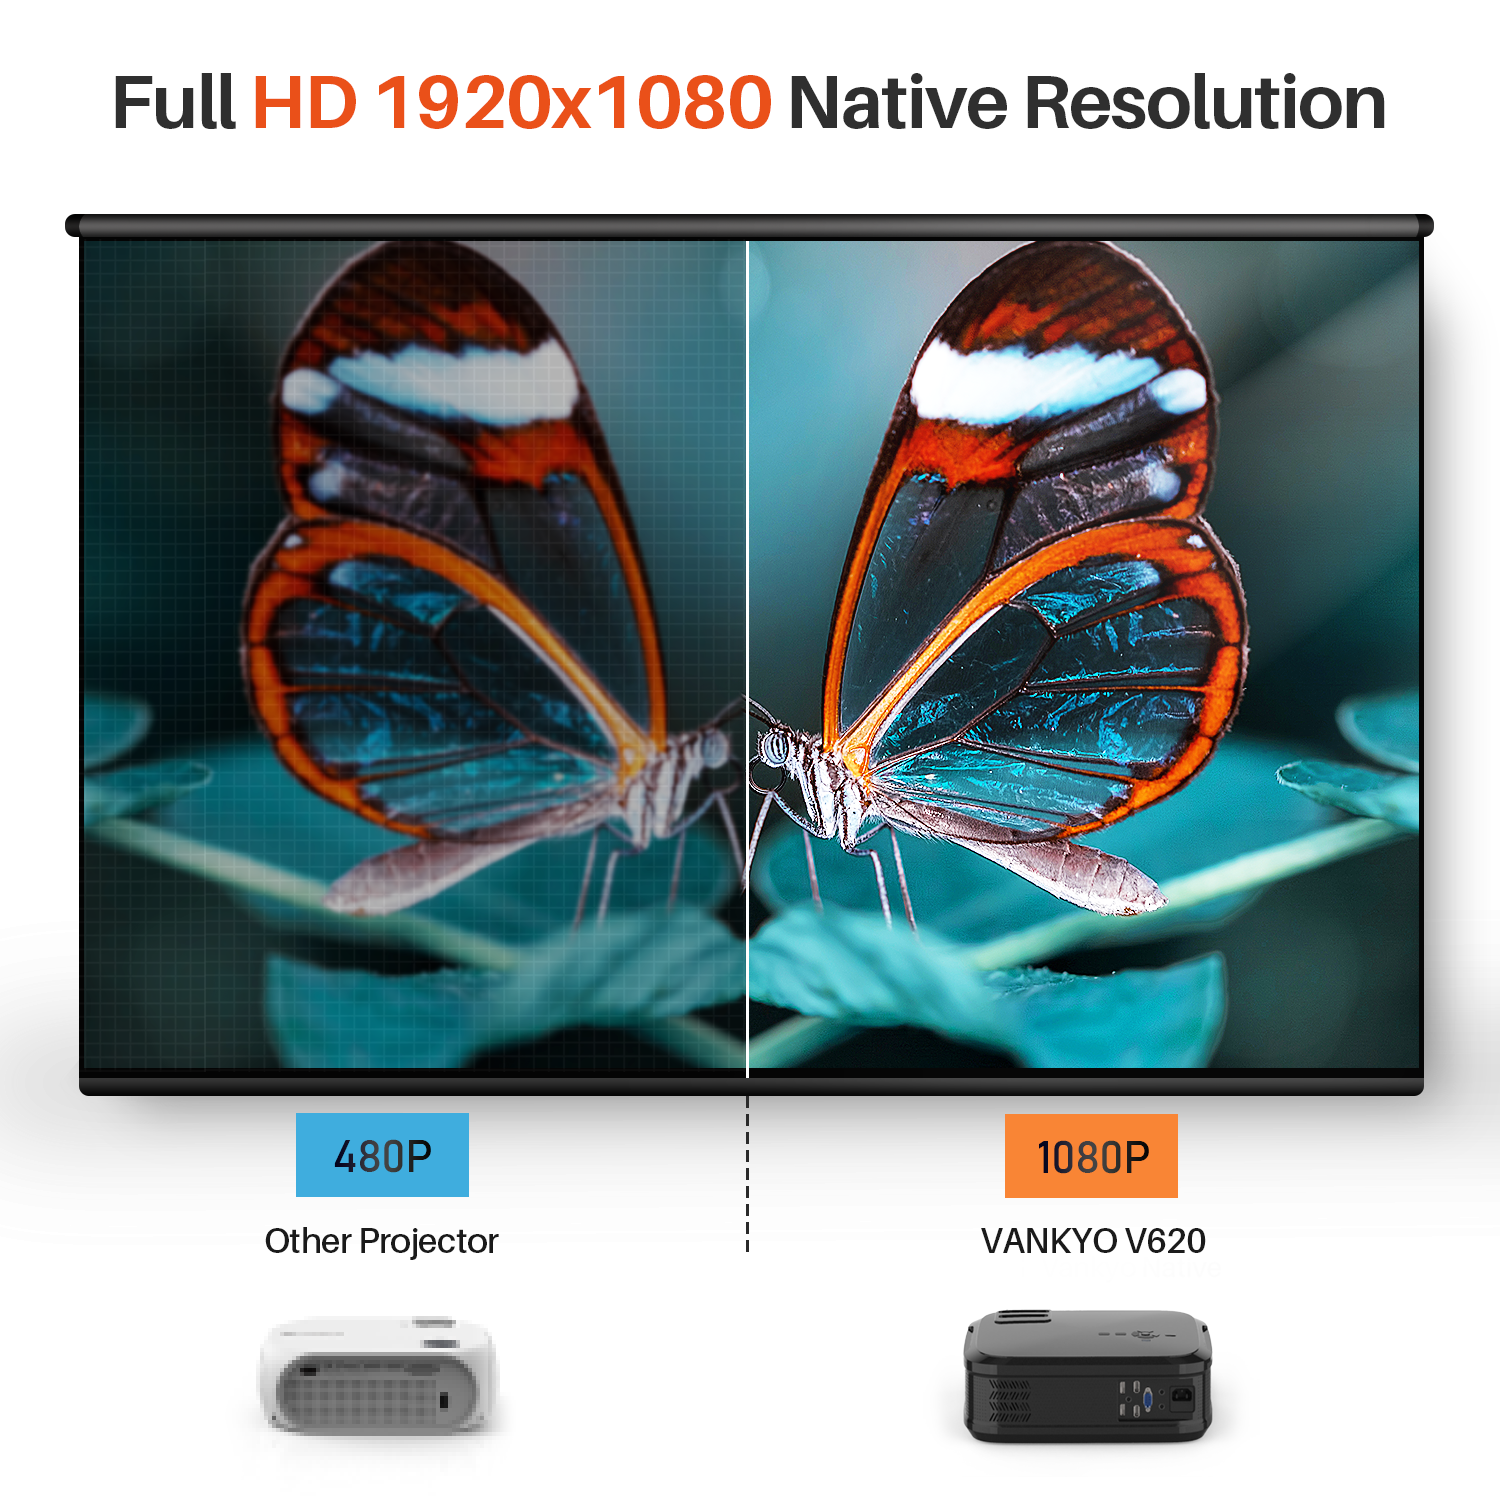 VANKYO Performance V620 Native 1080P Projector, with 200" Display 50,000 Hours LED Video Projector, Compatible with TV Stick, HDMI, AV, USB, iOS & Android for Home/Business Use - image 3 of 10